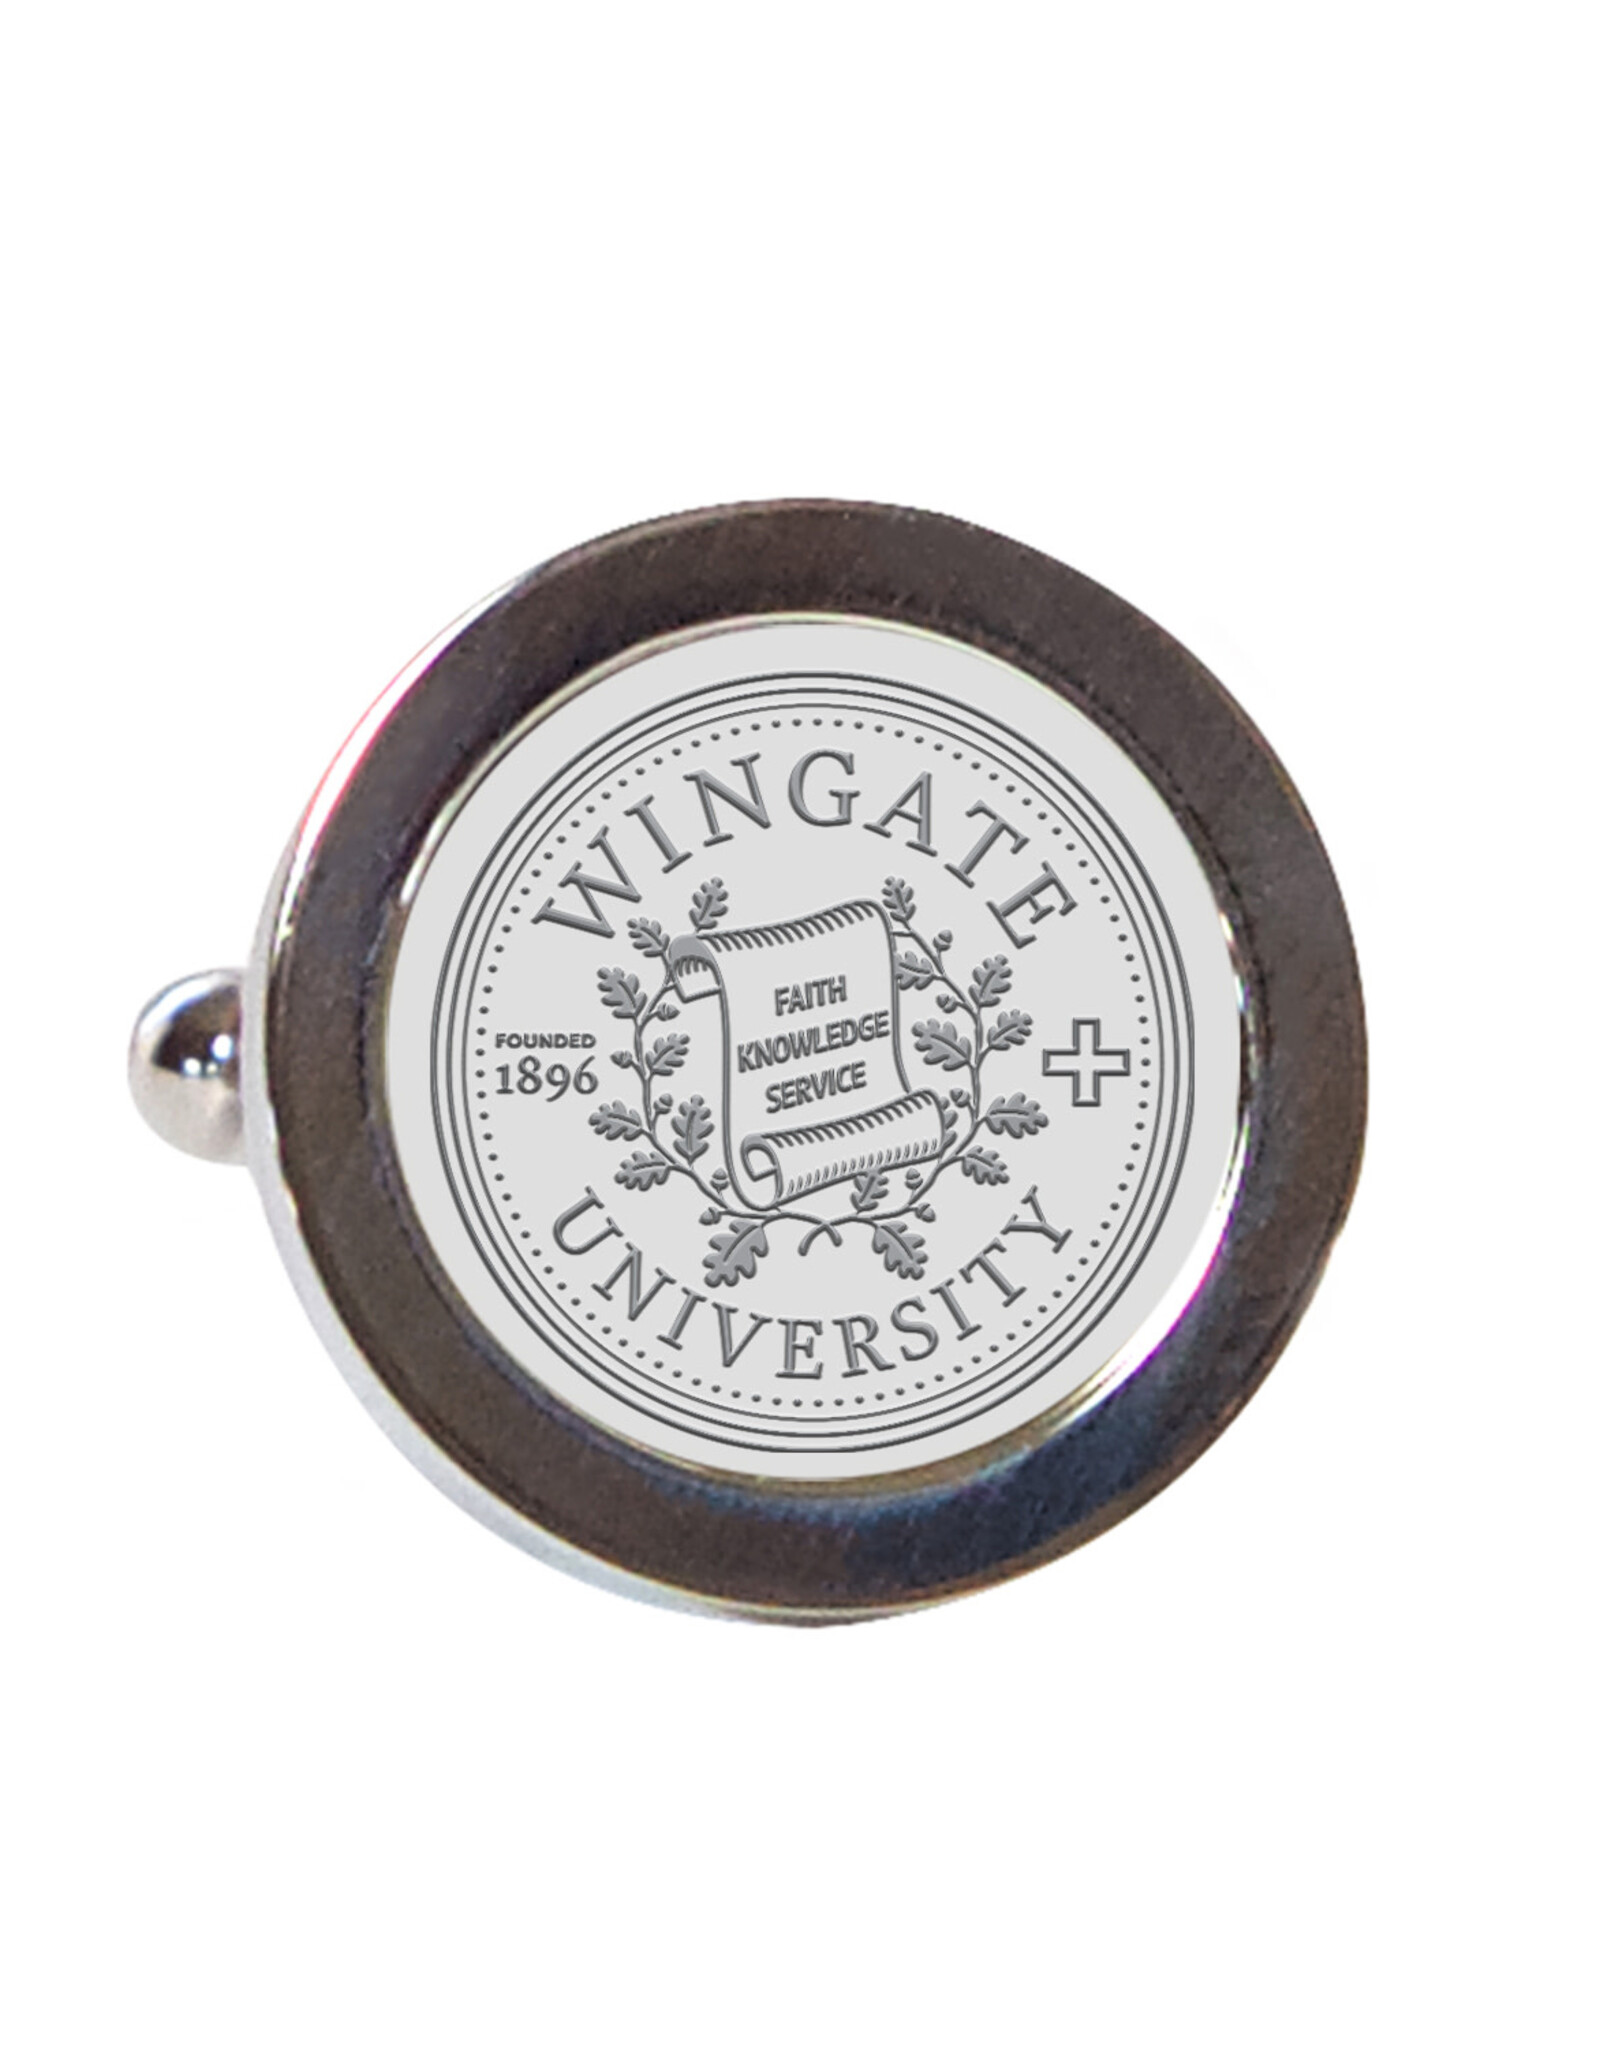 DROP SHIP ONLY Silver Wingate University Seal Cufflinks (ONLINE ONLY)